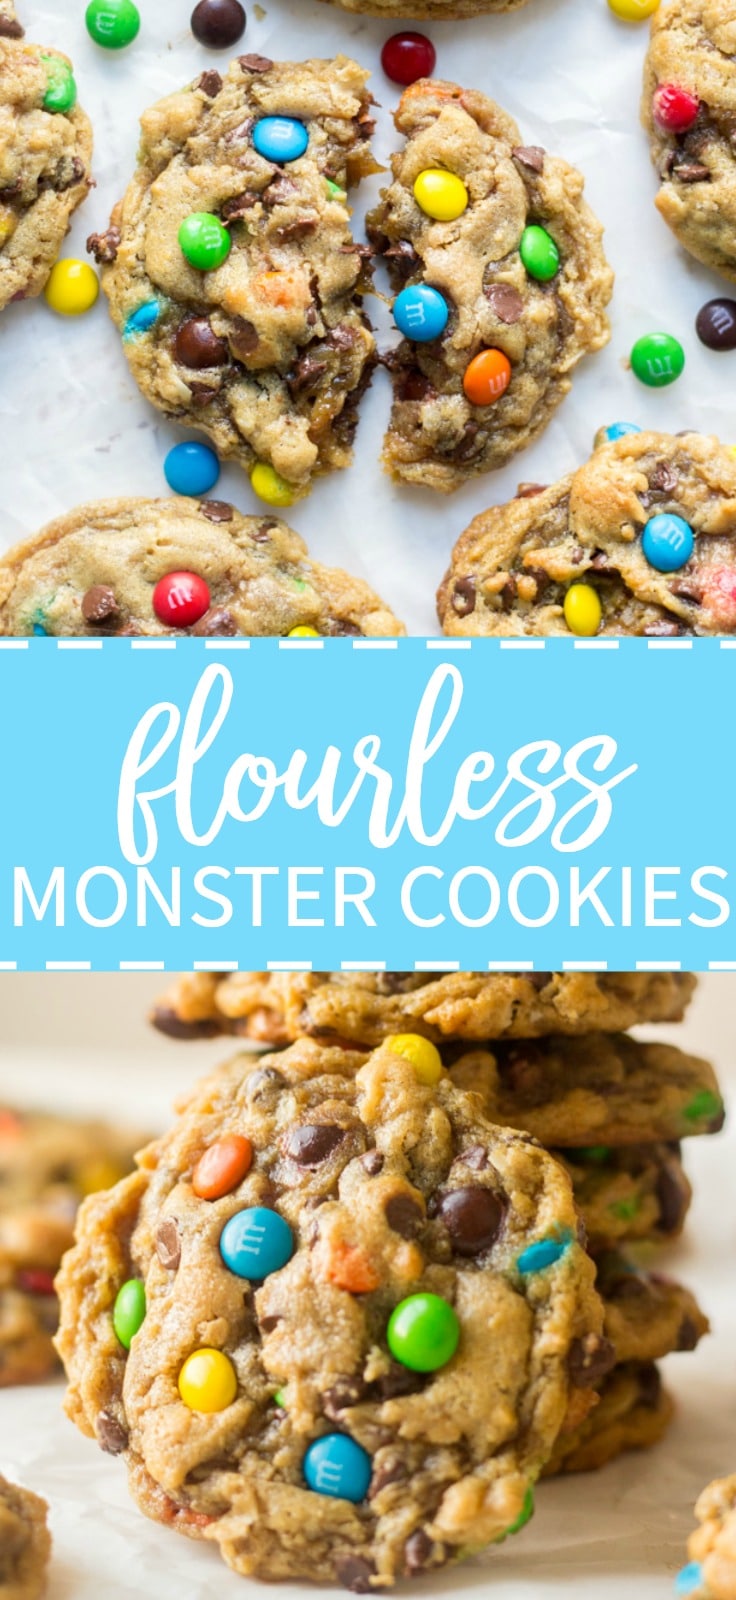 Thick and chewy, these flourless monster cookies are so easy to make. They require only one bowl and are filled with your favorite monster cookie ingredients. Gluten free options are super easy to add and the flavor is out of this world.